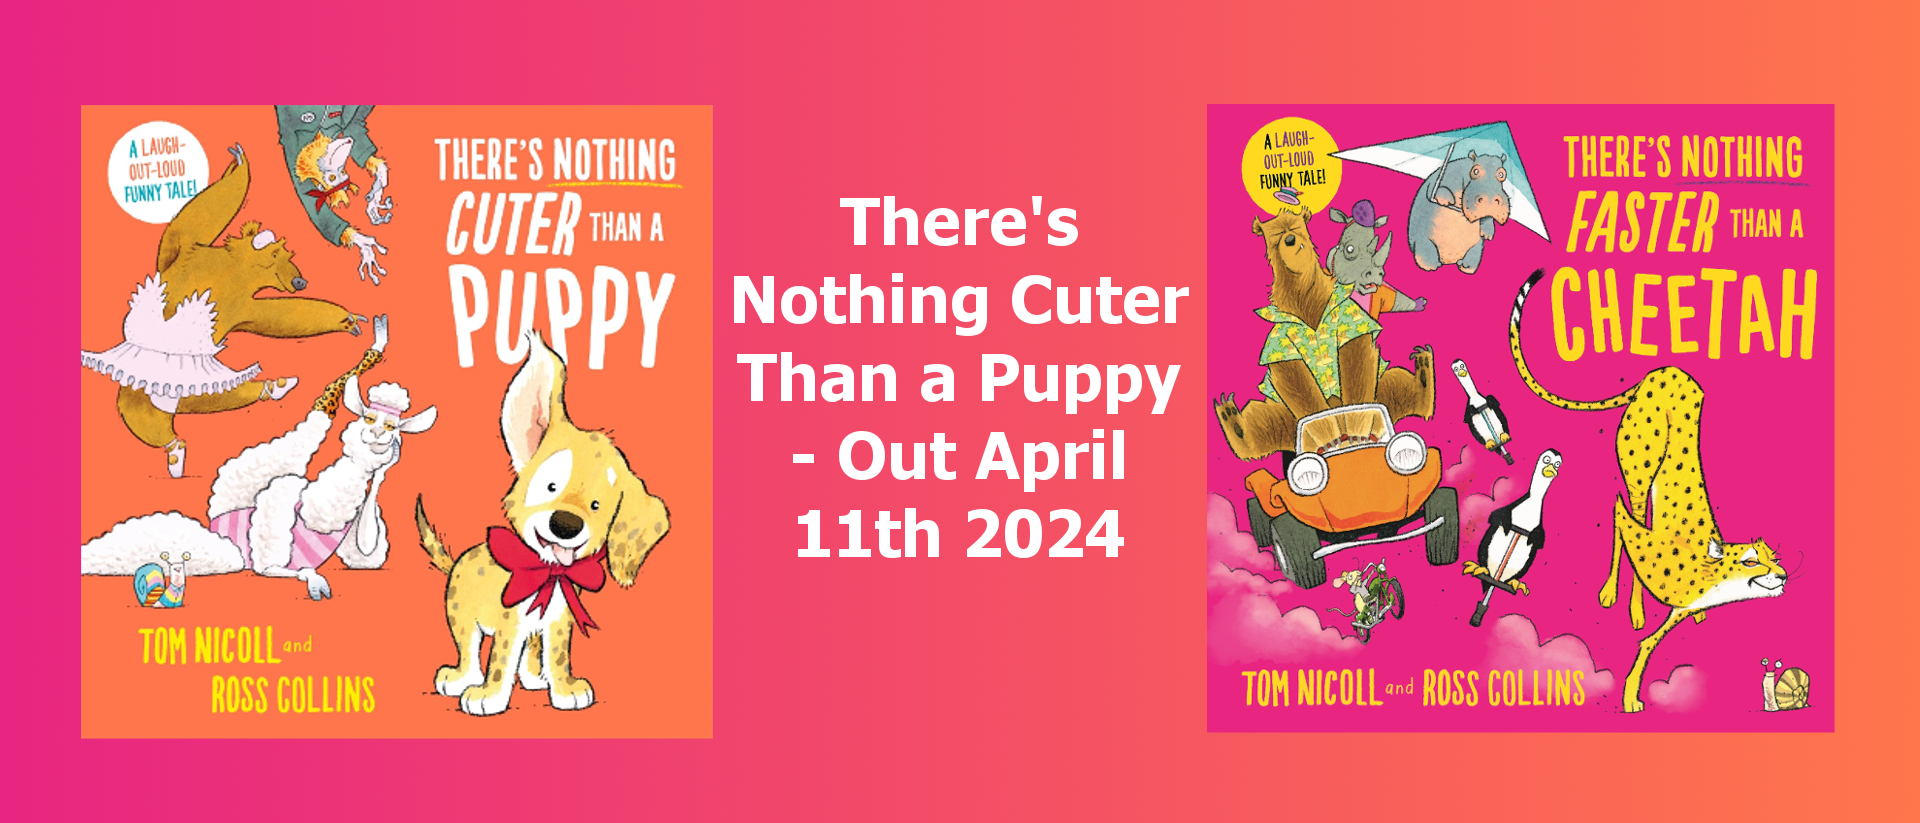 There's Nothing Cuter than a Puppy out April 11th 2024 and There's Nothing Faster Than A Cheetah by Tom Nicoll and Ross Collins available now.